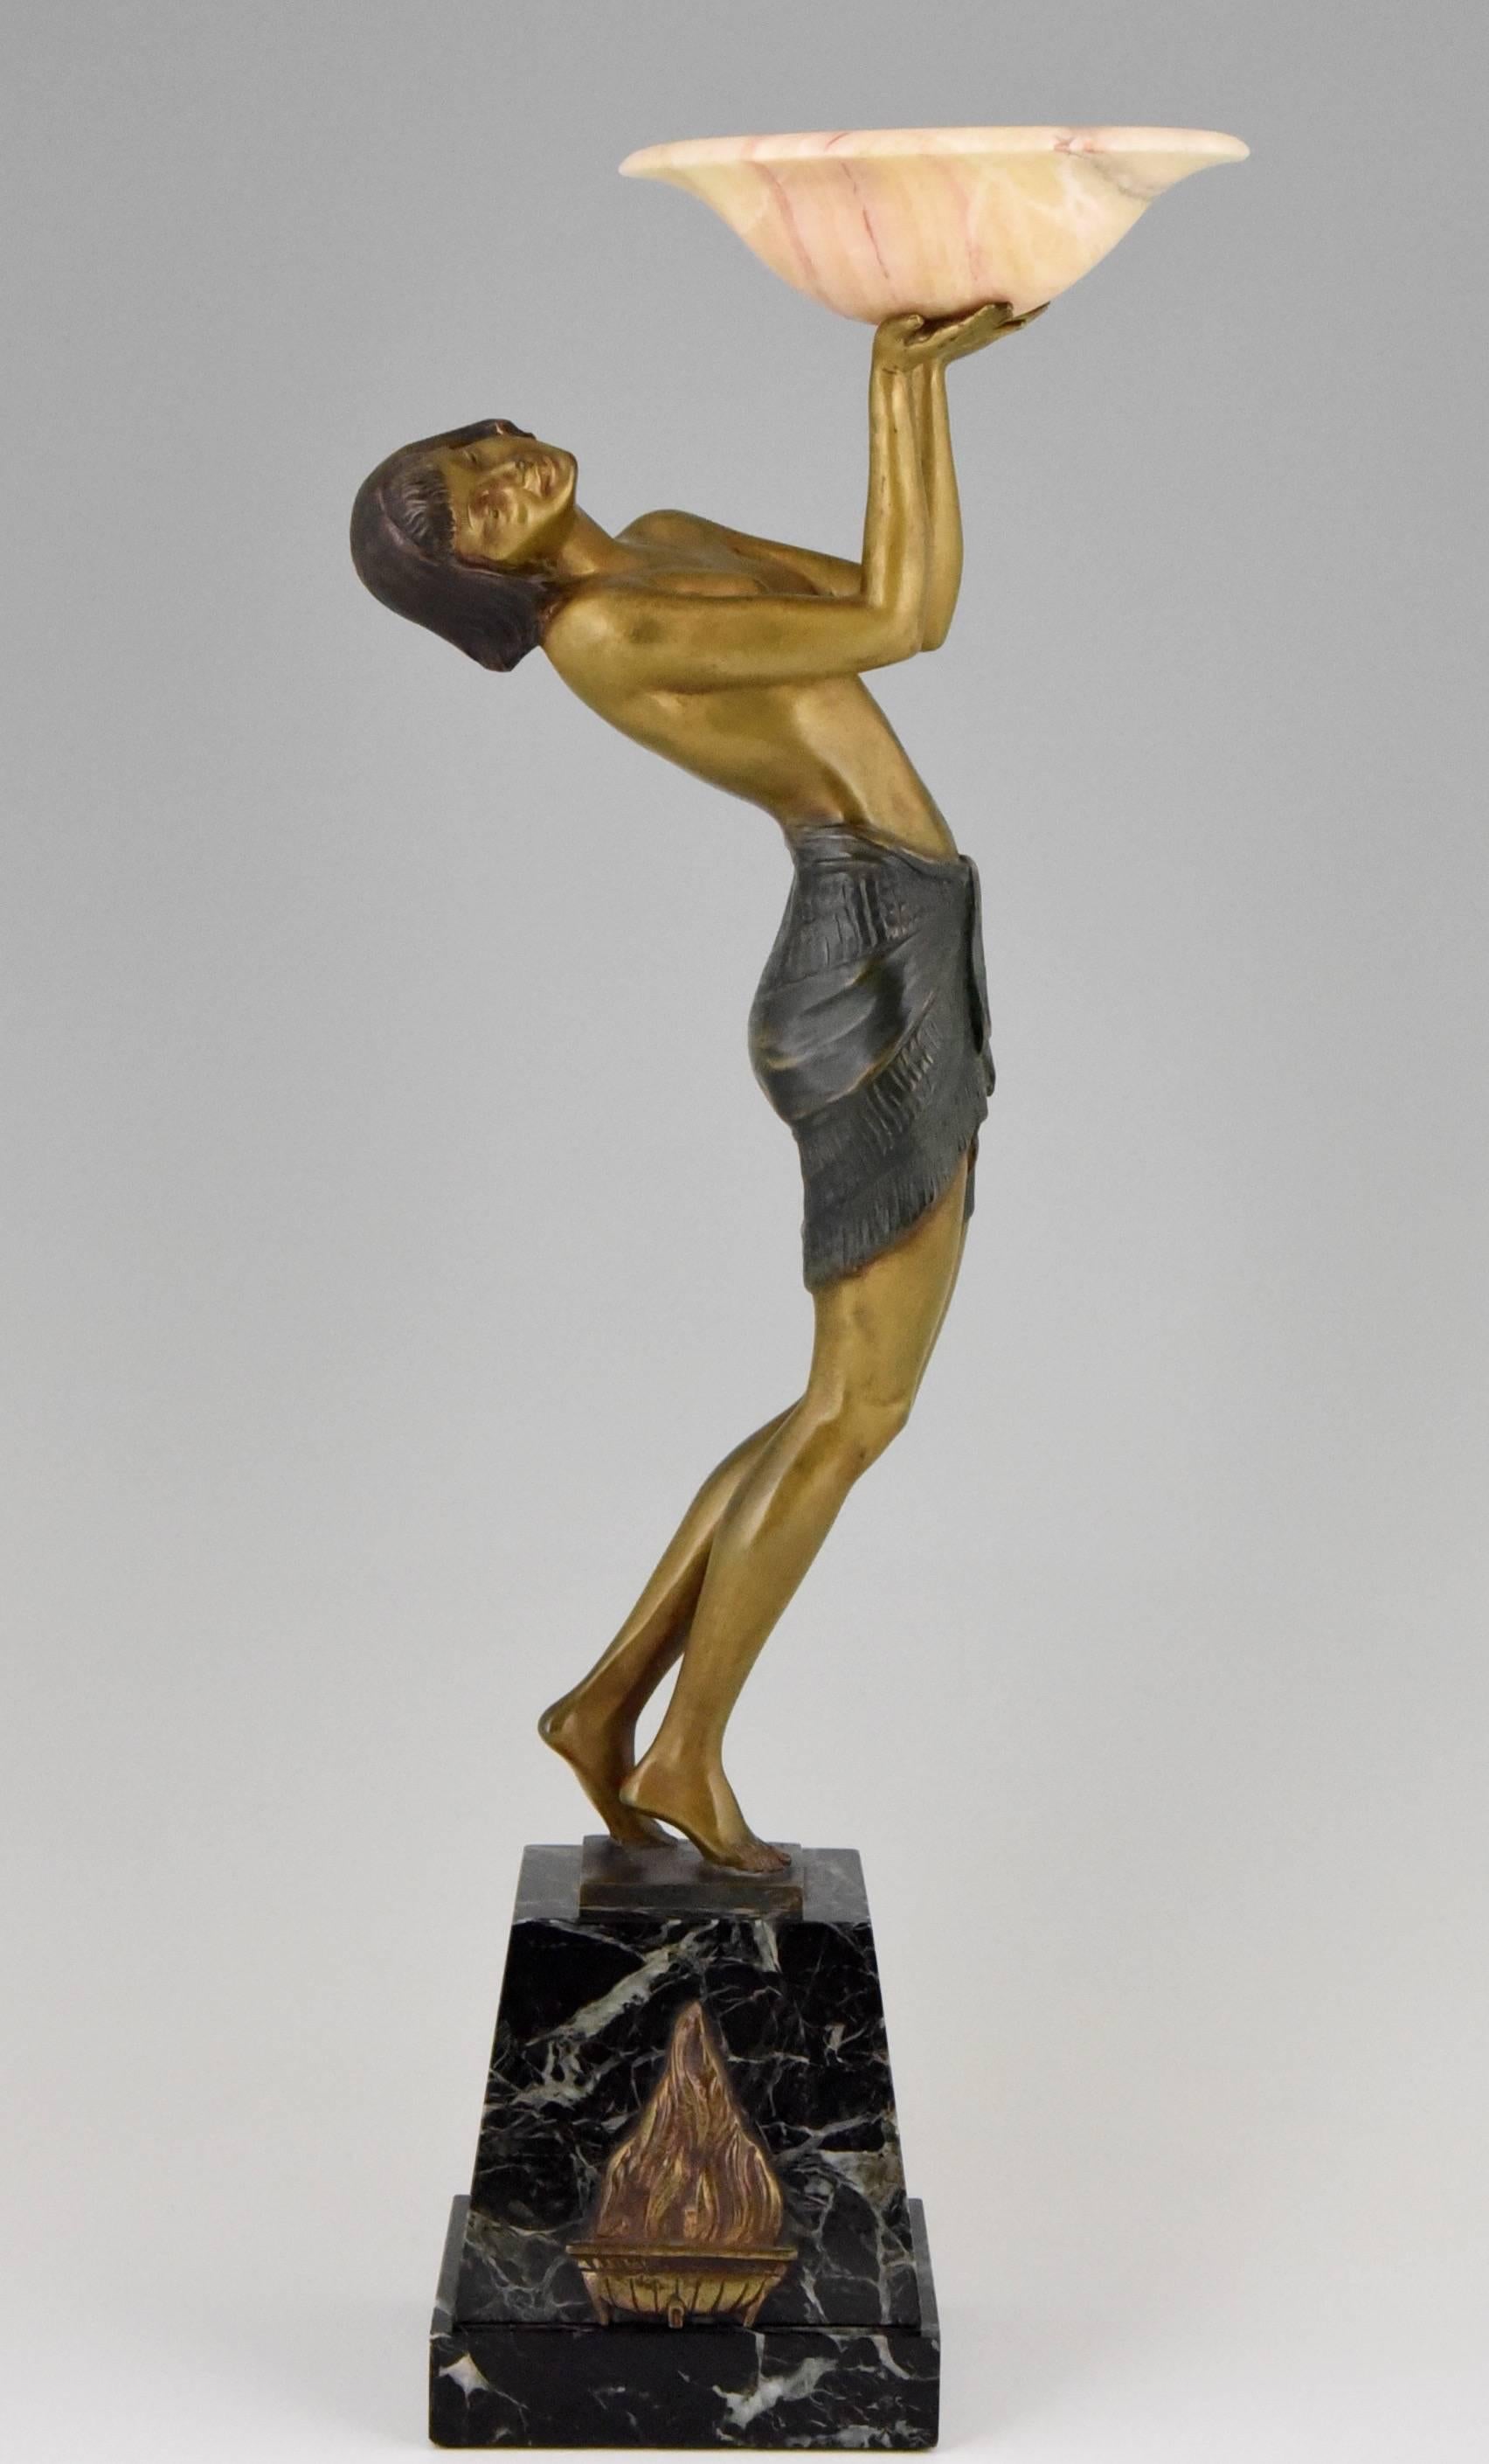 Art Deco bronze of a woman holding a tray.  
The marble base has a bronze decoration. 
Signed by the french artist Pierre Laurel.

Literature: 
“Bronzes, sculptors and founders” by H. Berman, Abage.  
“Art deco sculpture” by Victor Arwas,